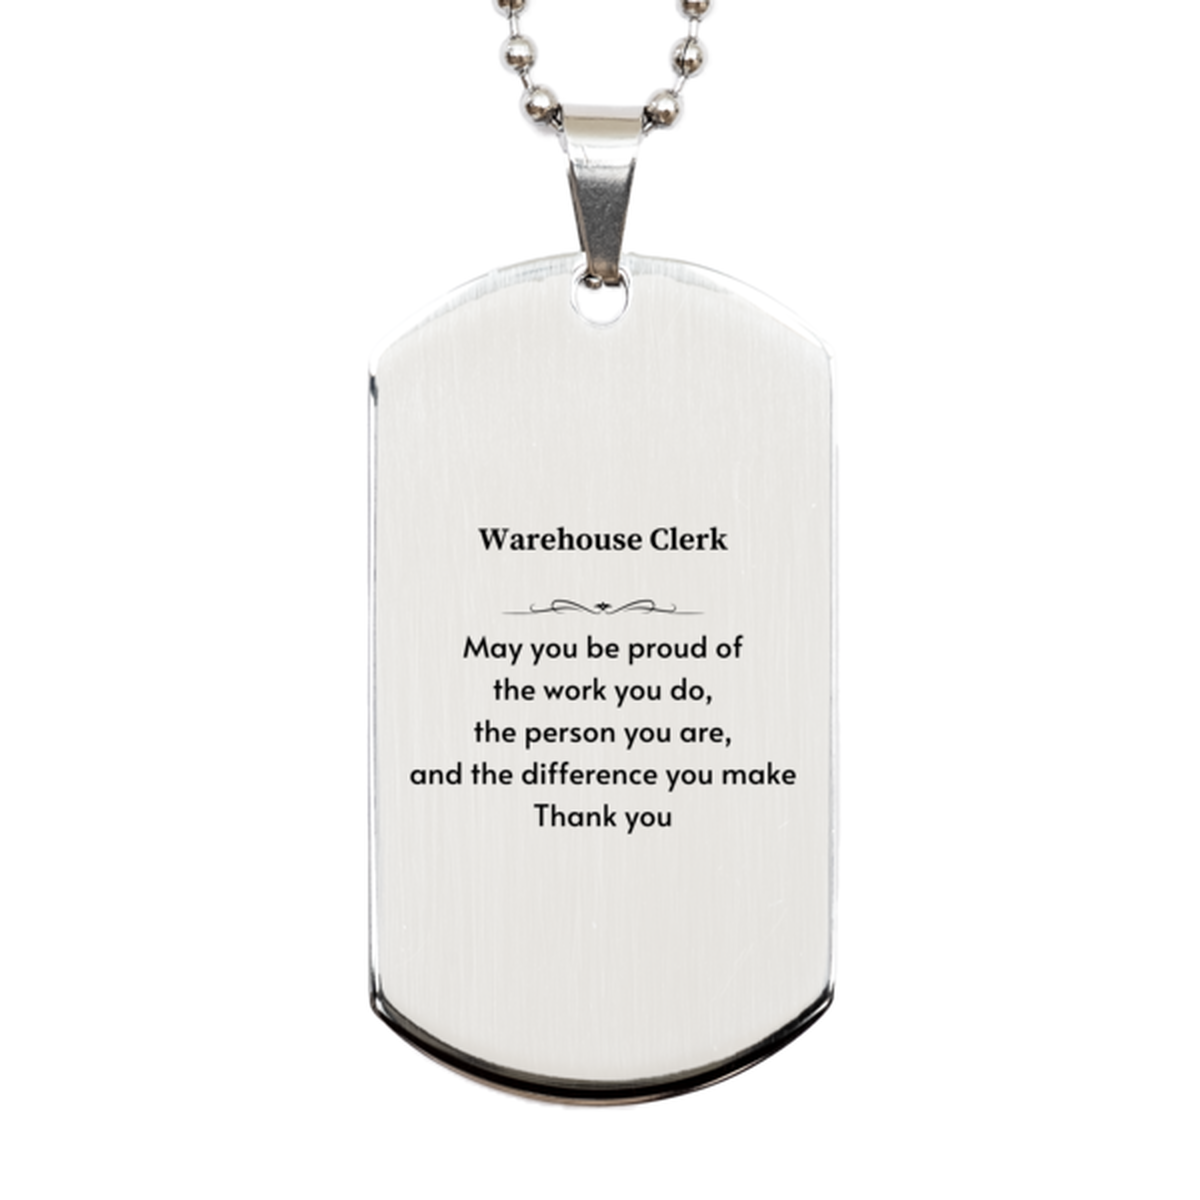 Heartwarming Silver Dog Tag Retirement Coworkers Gifts for Warehouse Clerk, Warehouse Clerk May You be proud of the work you do, the person you are Gifts for Boss Men Women Friends